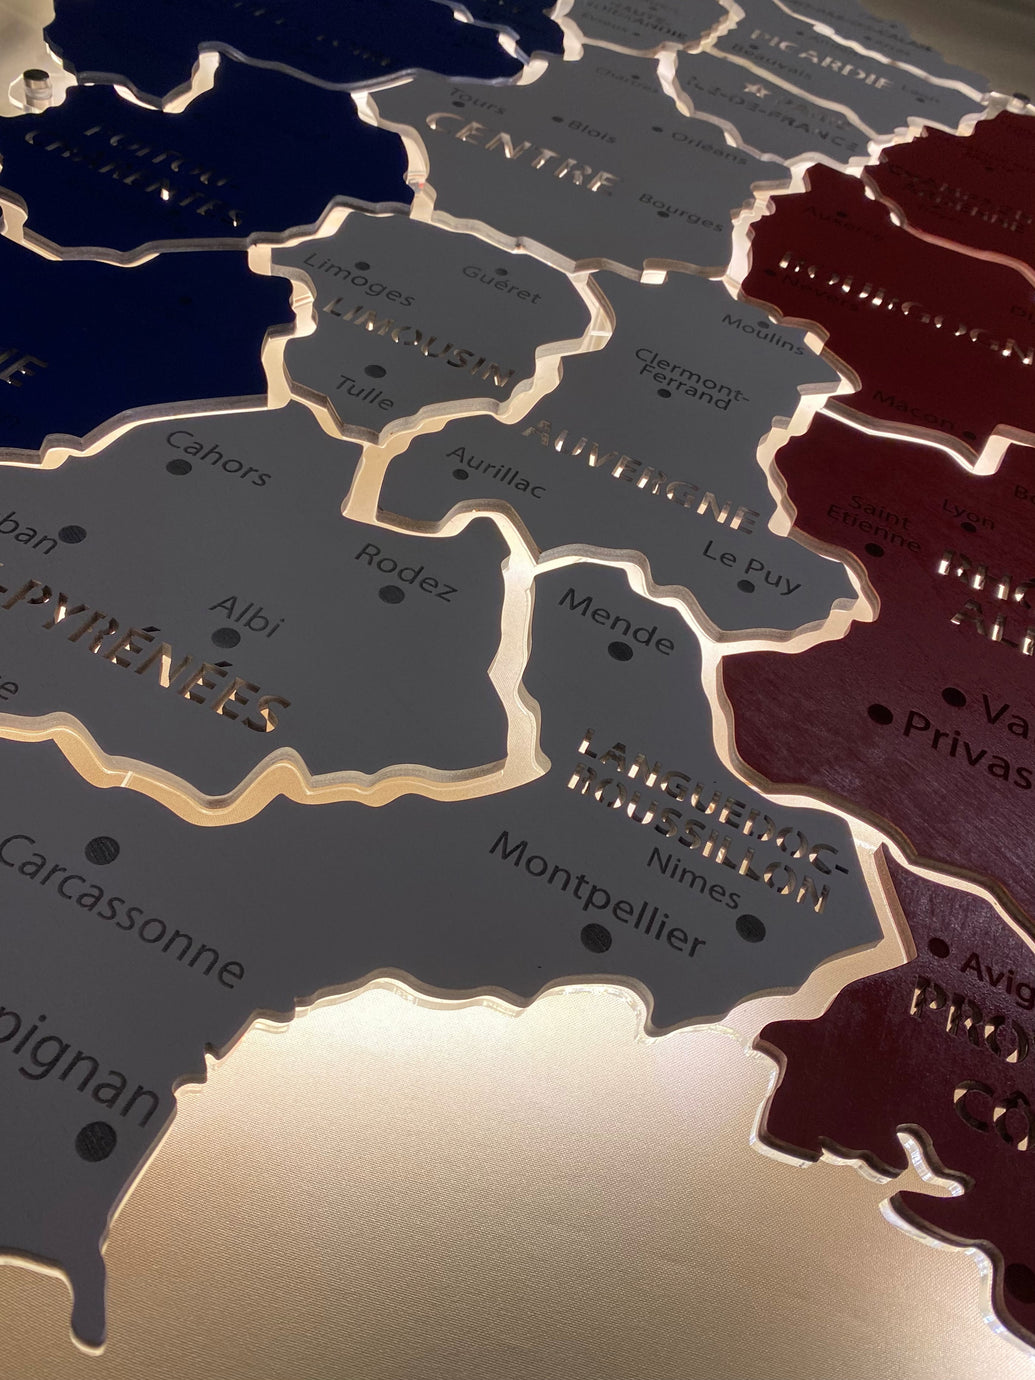 France LED map on acrylic glass with backlighting between regions color Flag